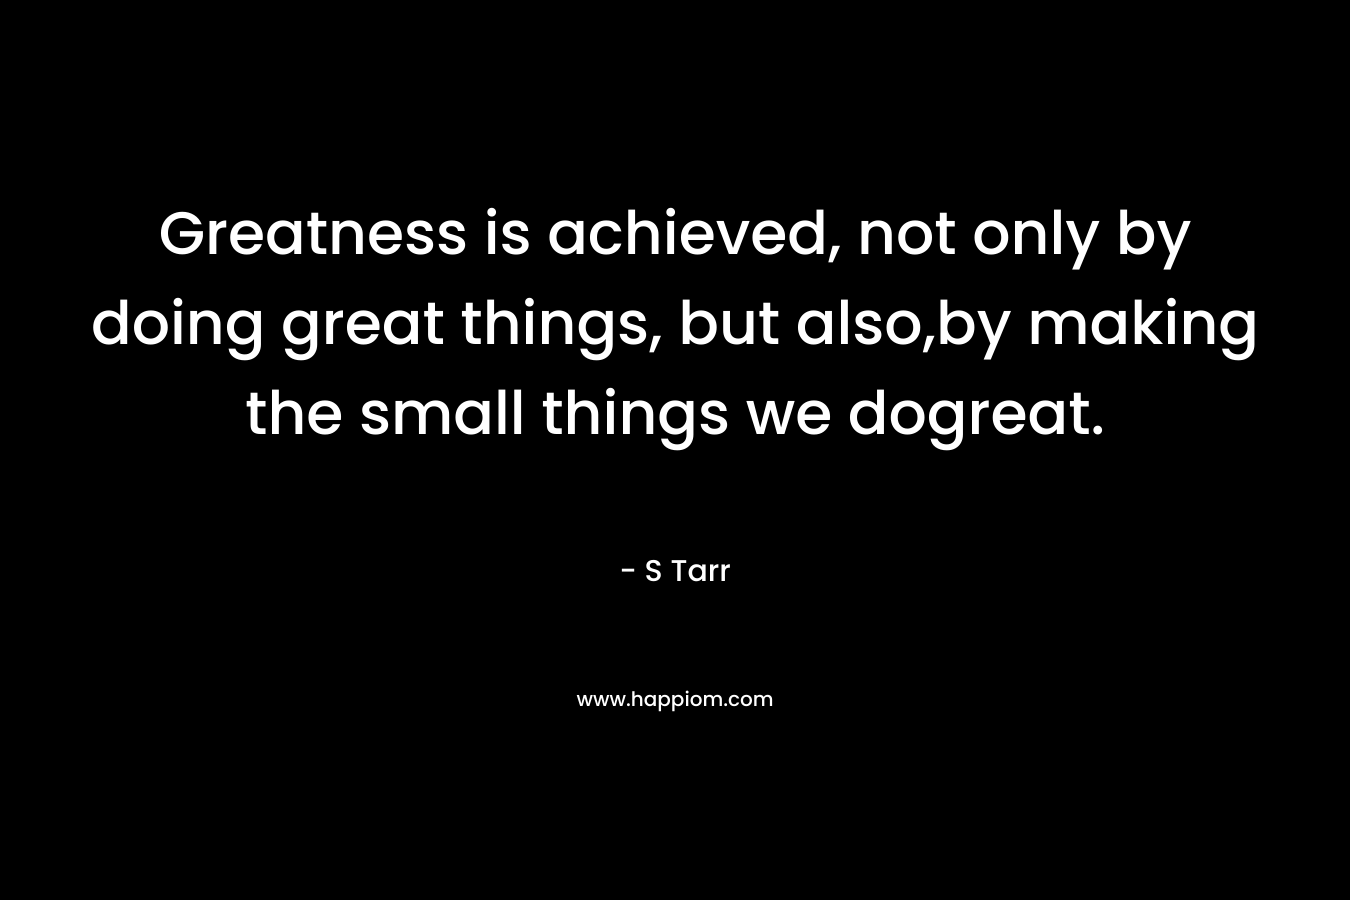 Greatness is achieved, not only by doing great things, but also,by making the small things we dogreat. – S Tarr